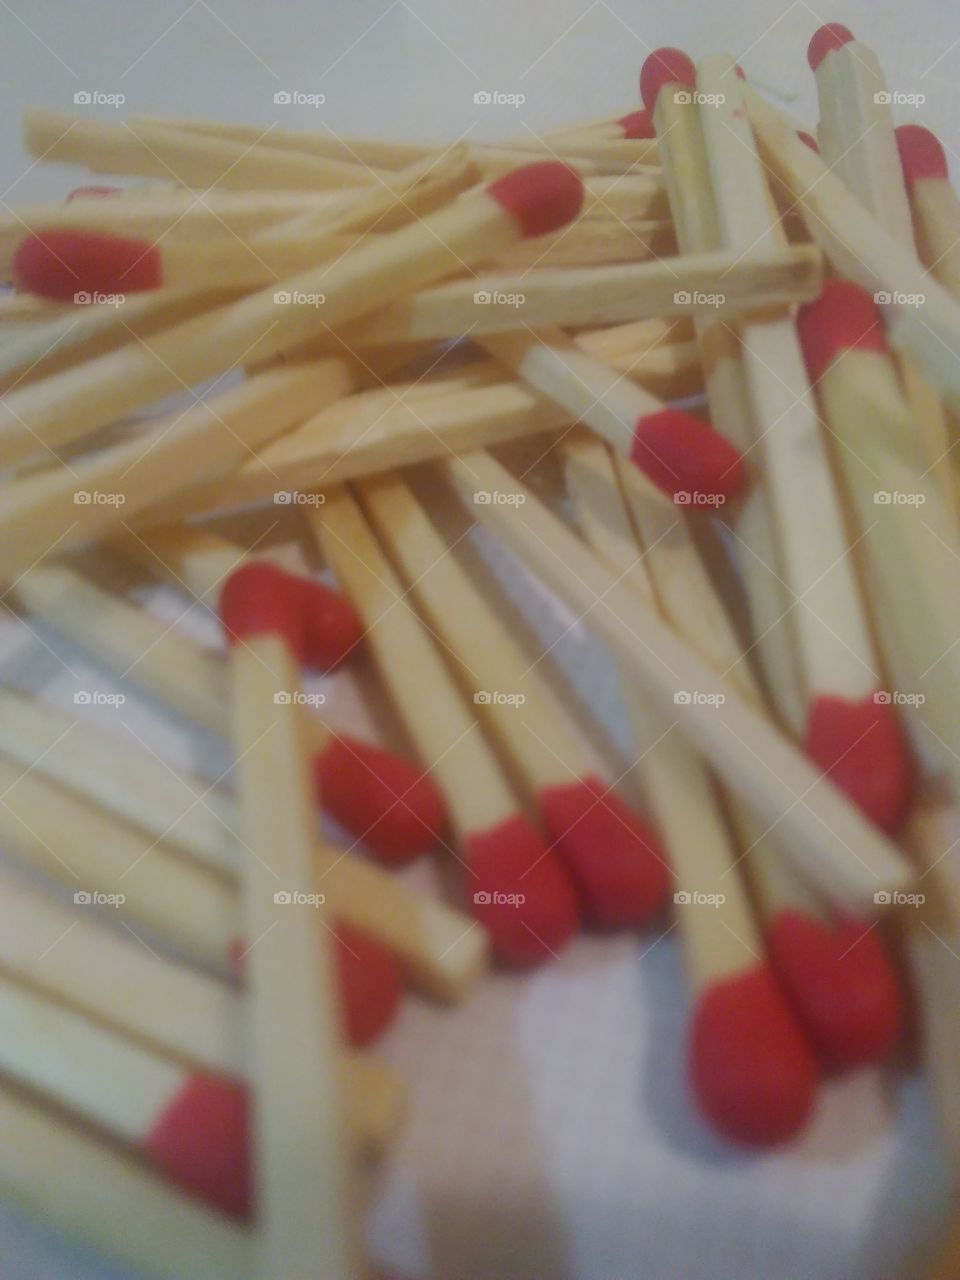 bunches of matches